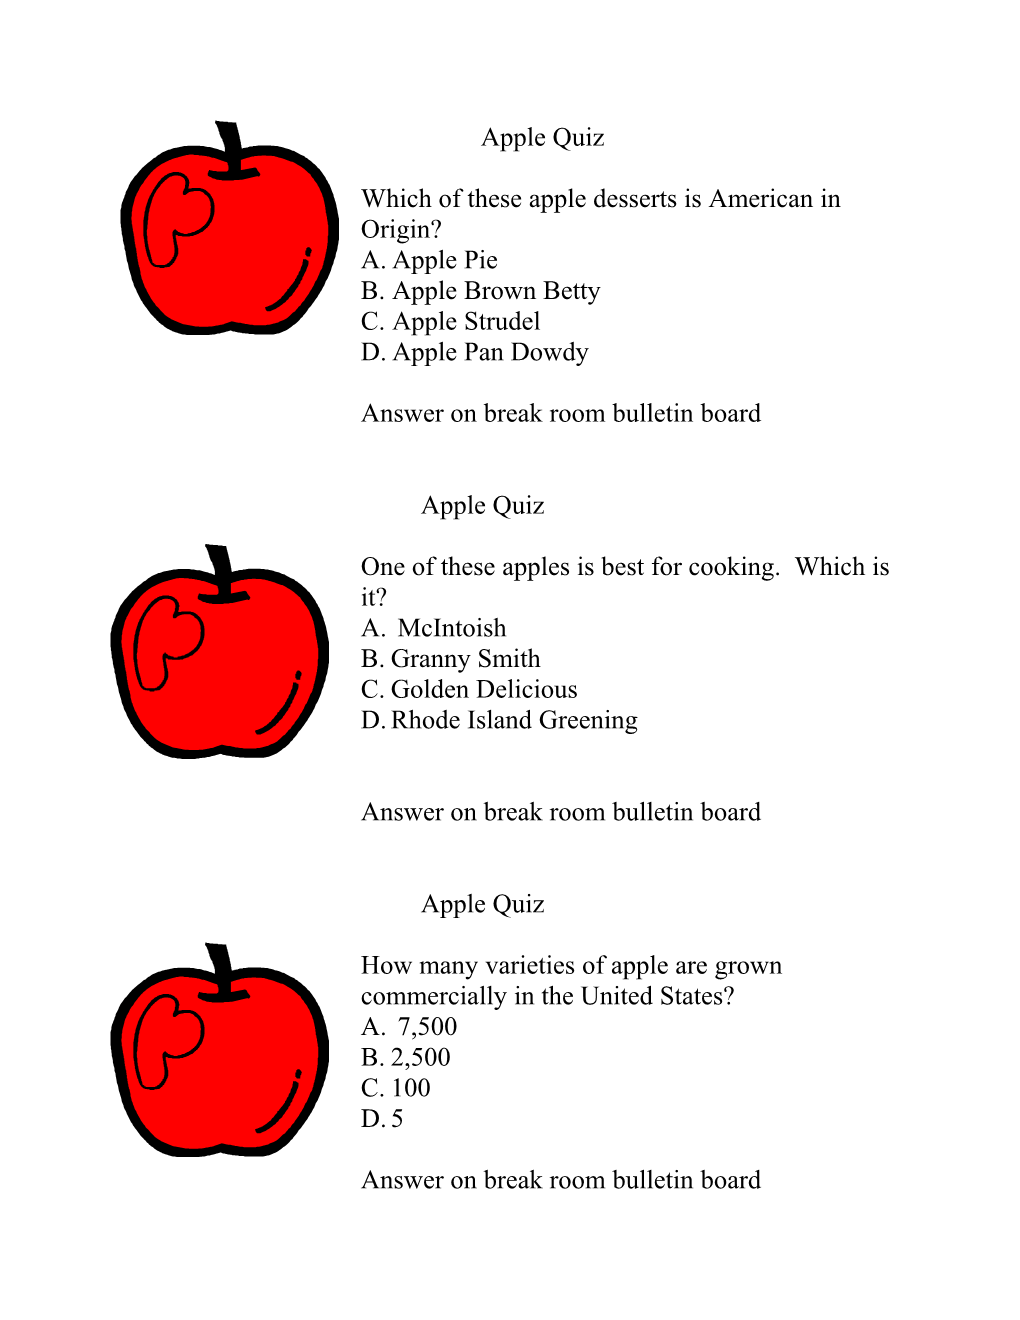 Which of These Apple Desserts Is American in Origin?